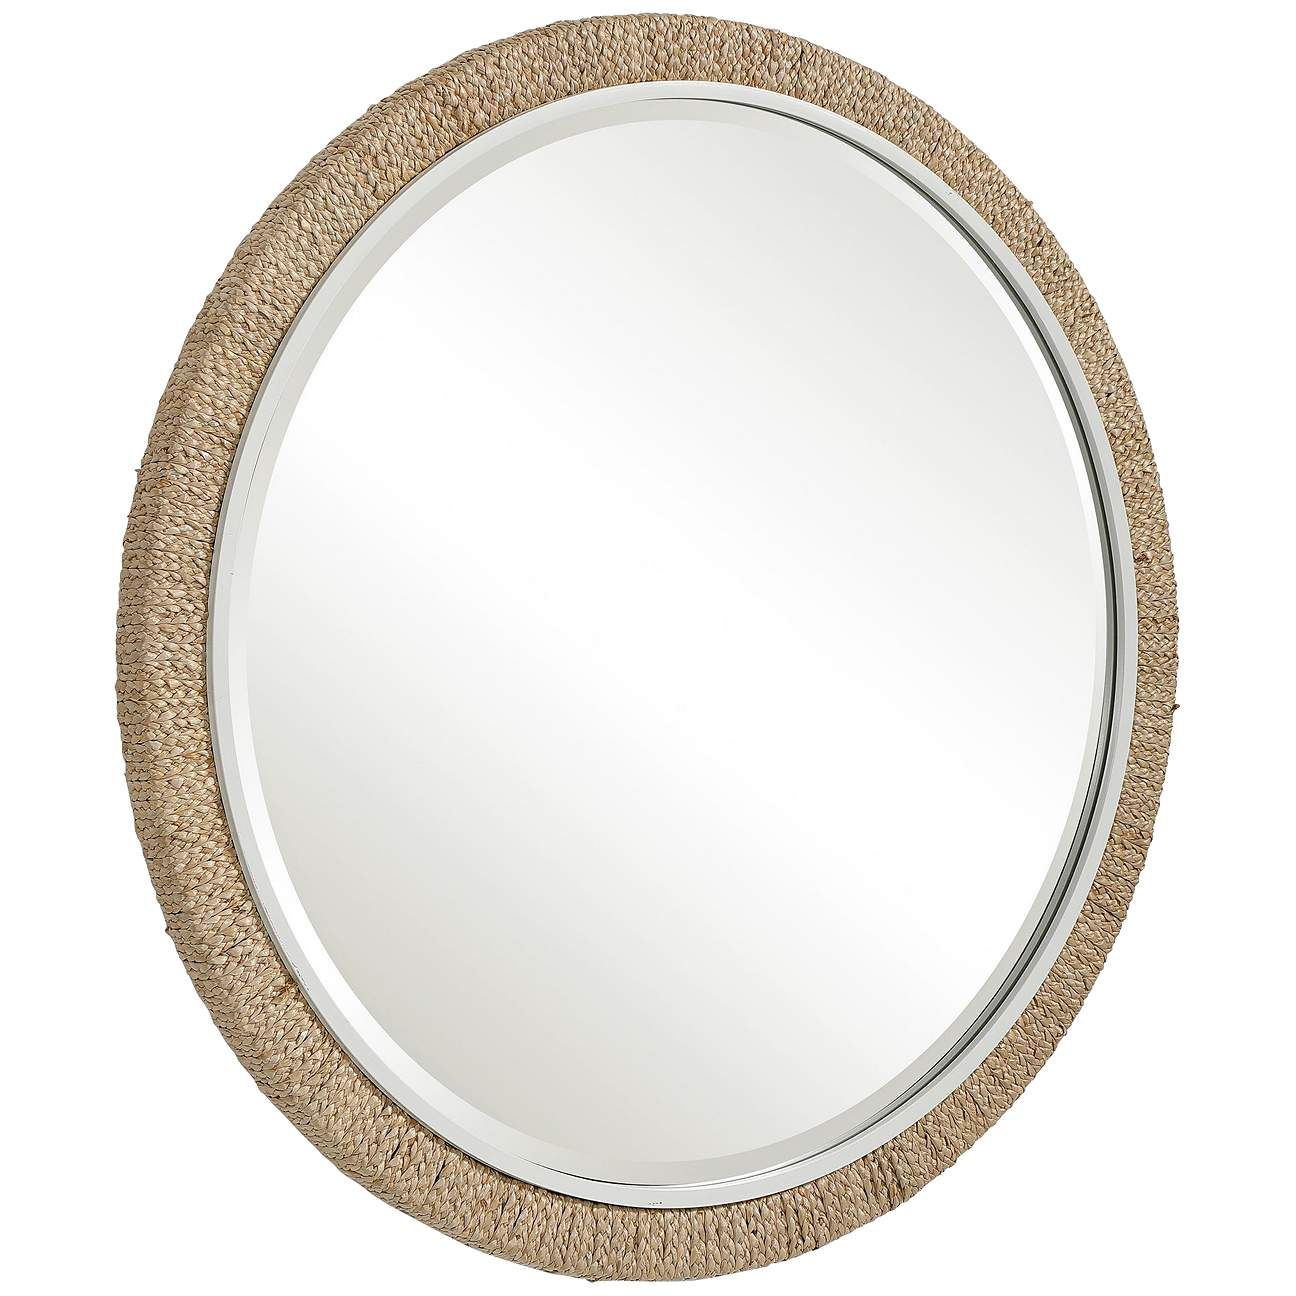 Carbet Braided Rope 39 3/4" Round Oversized Wall Mirror | LampsPlus.com